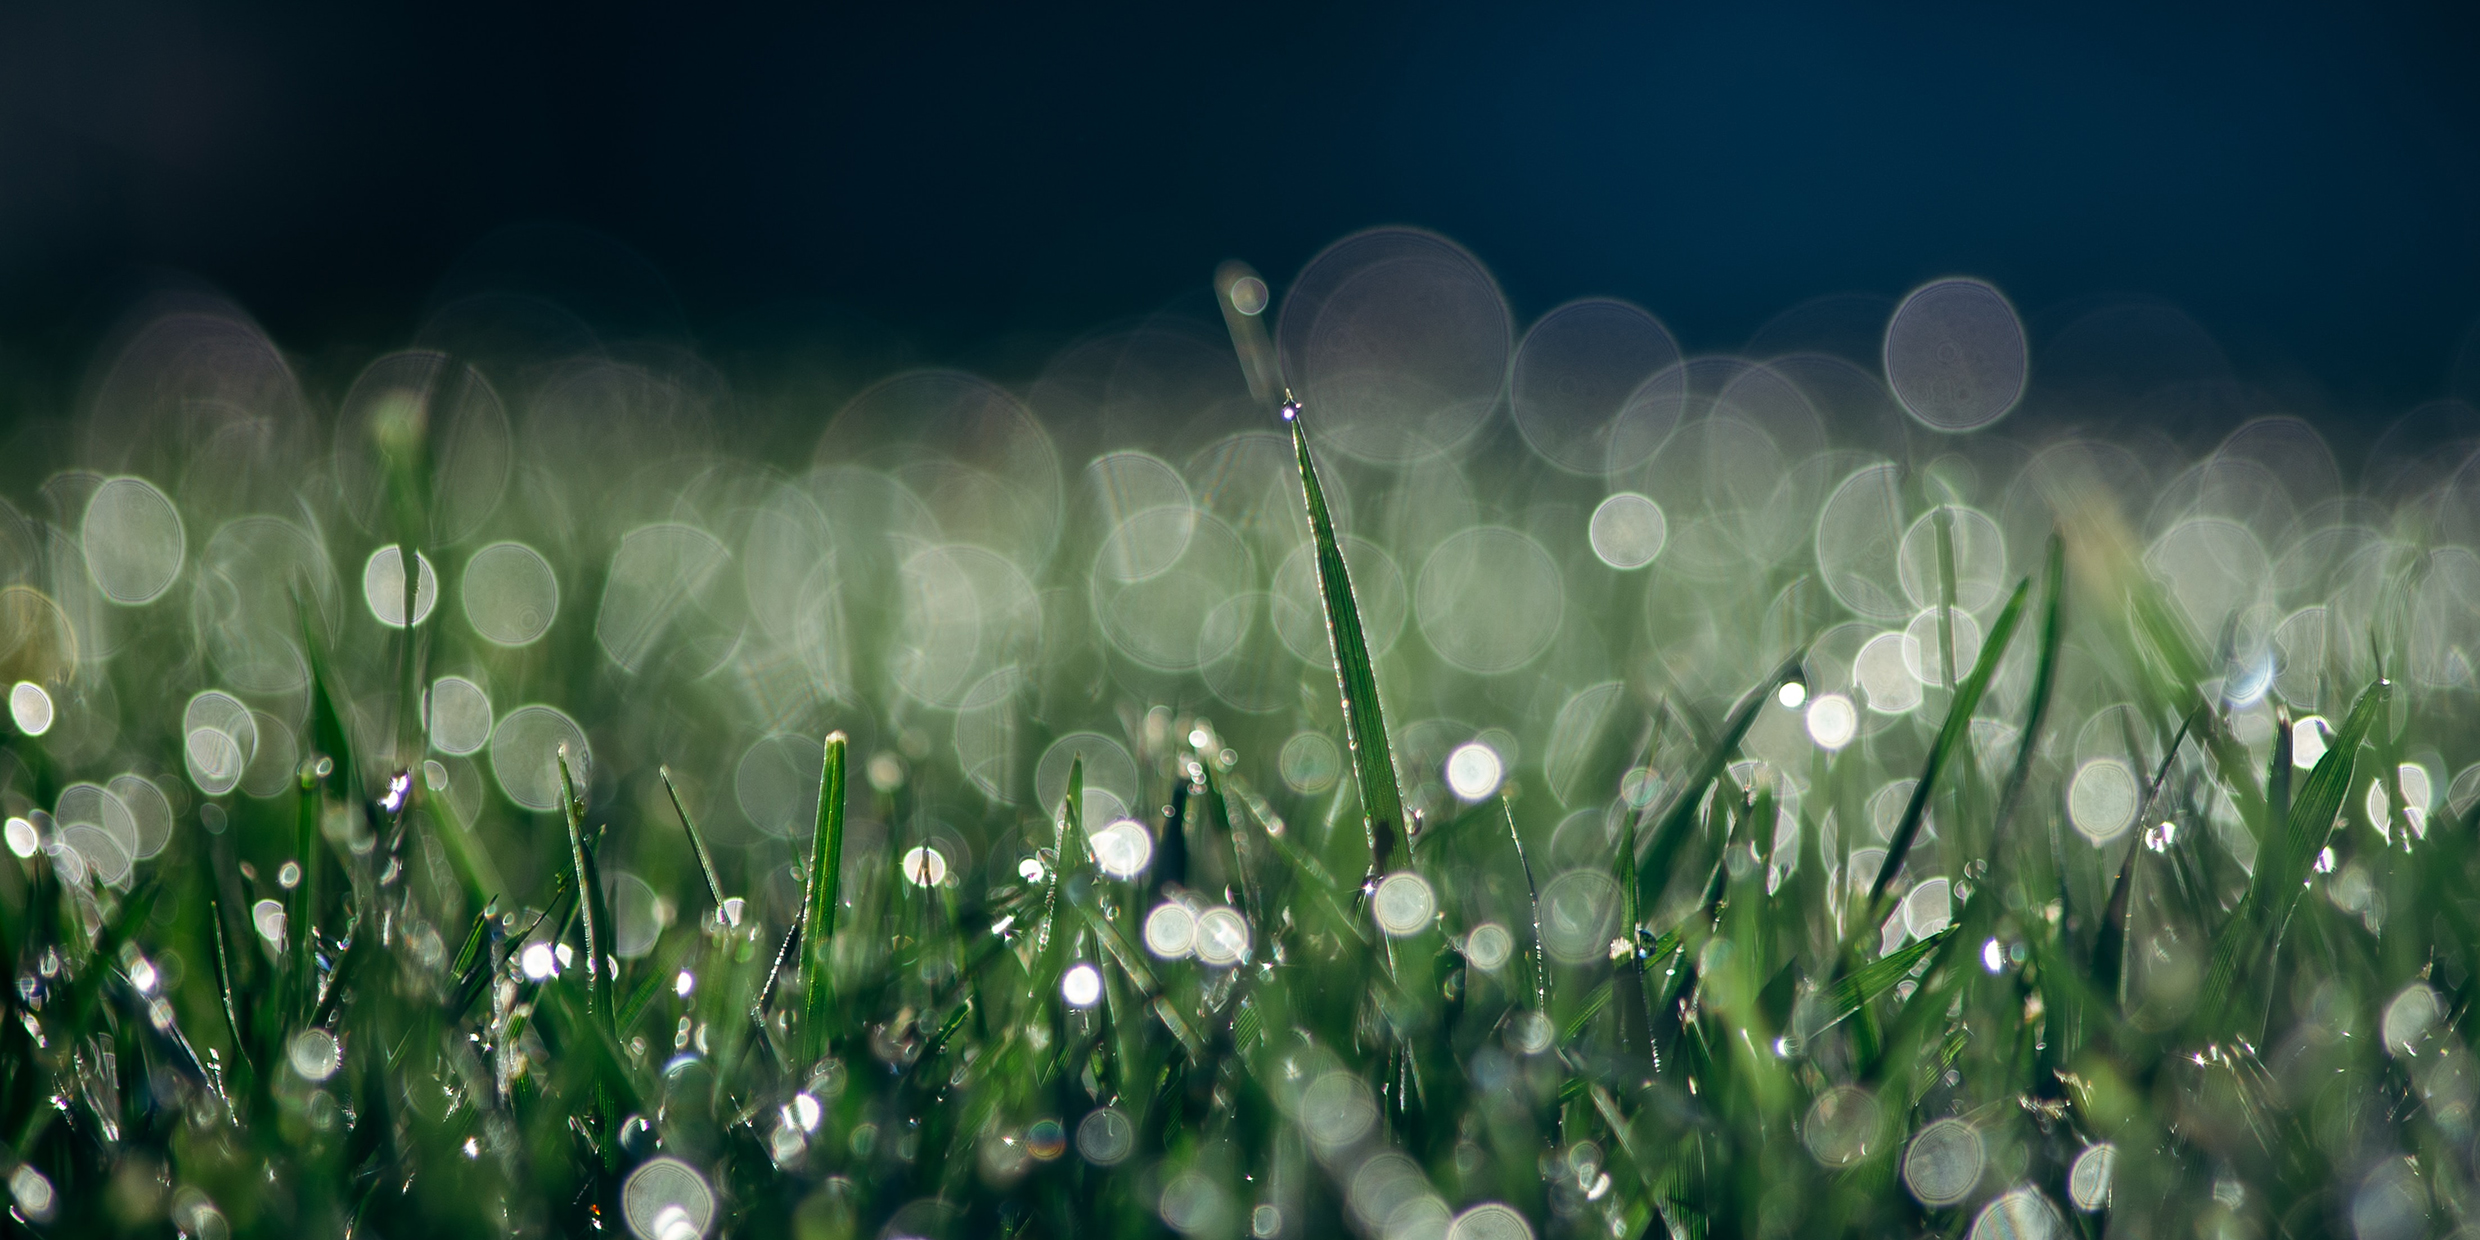 Soft-focus image of blades of grass glistening with dew